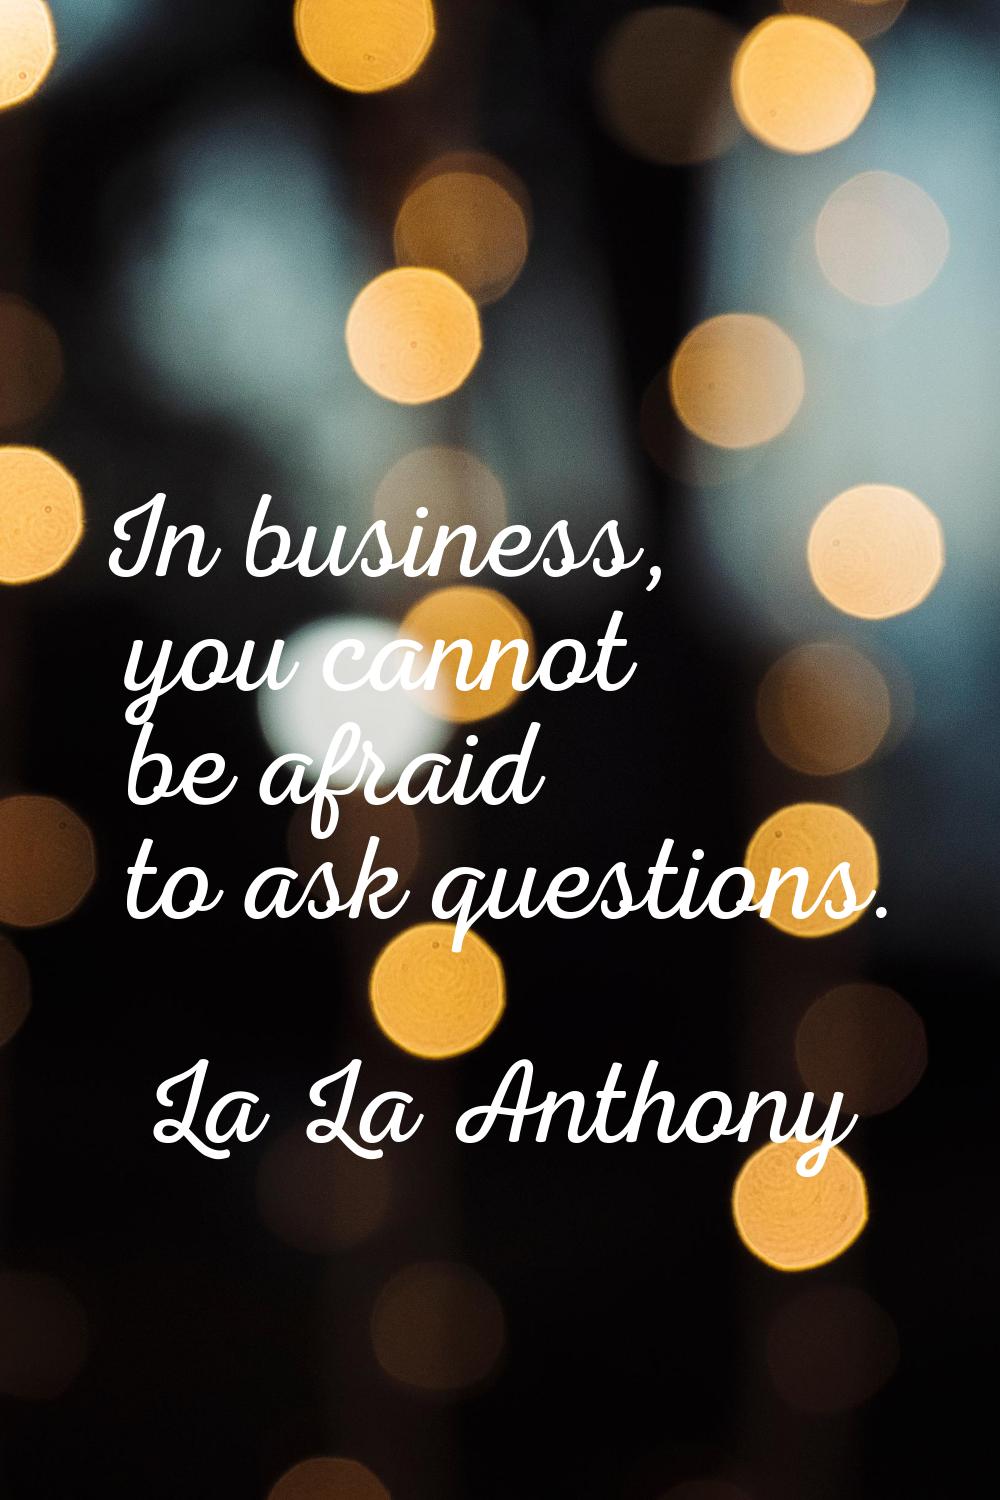 In business, you cannot be afraid to ask questions.